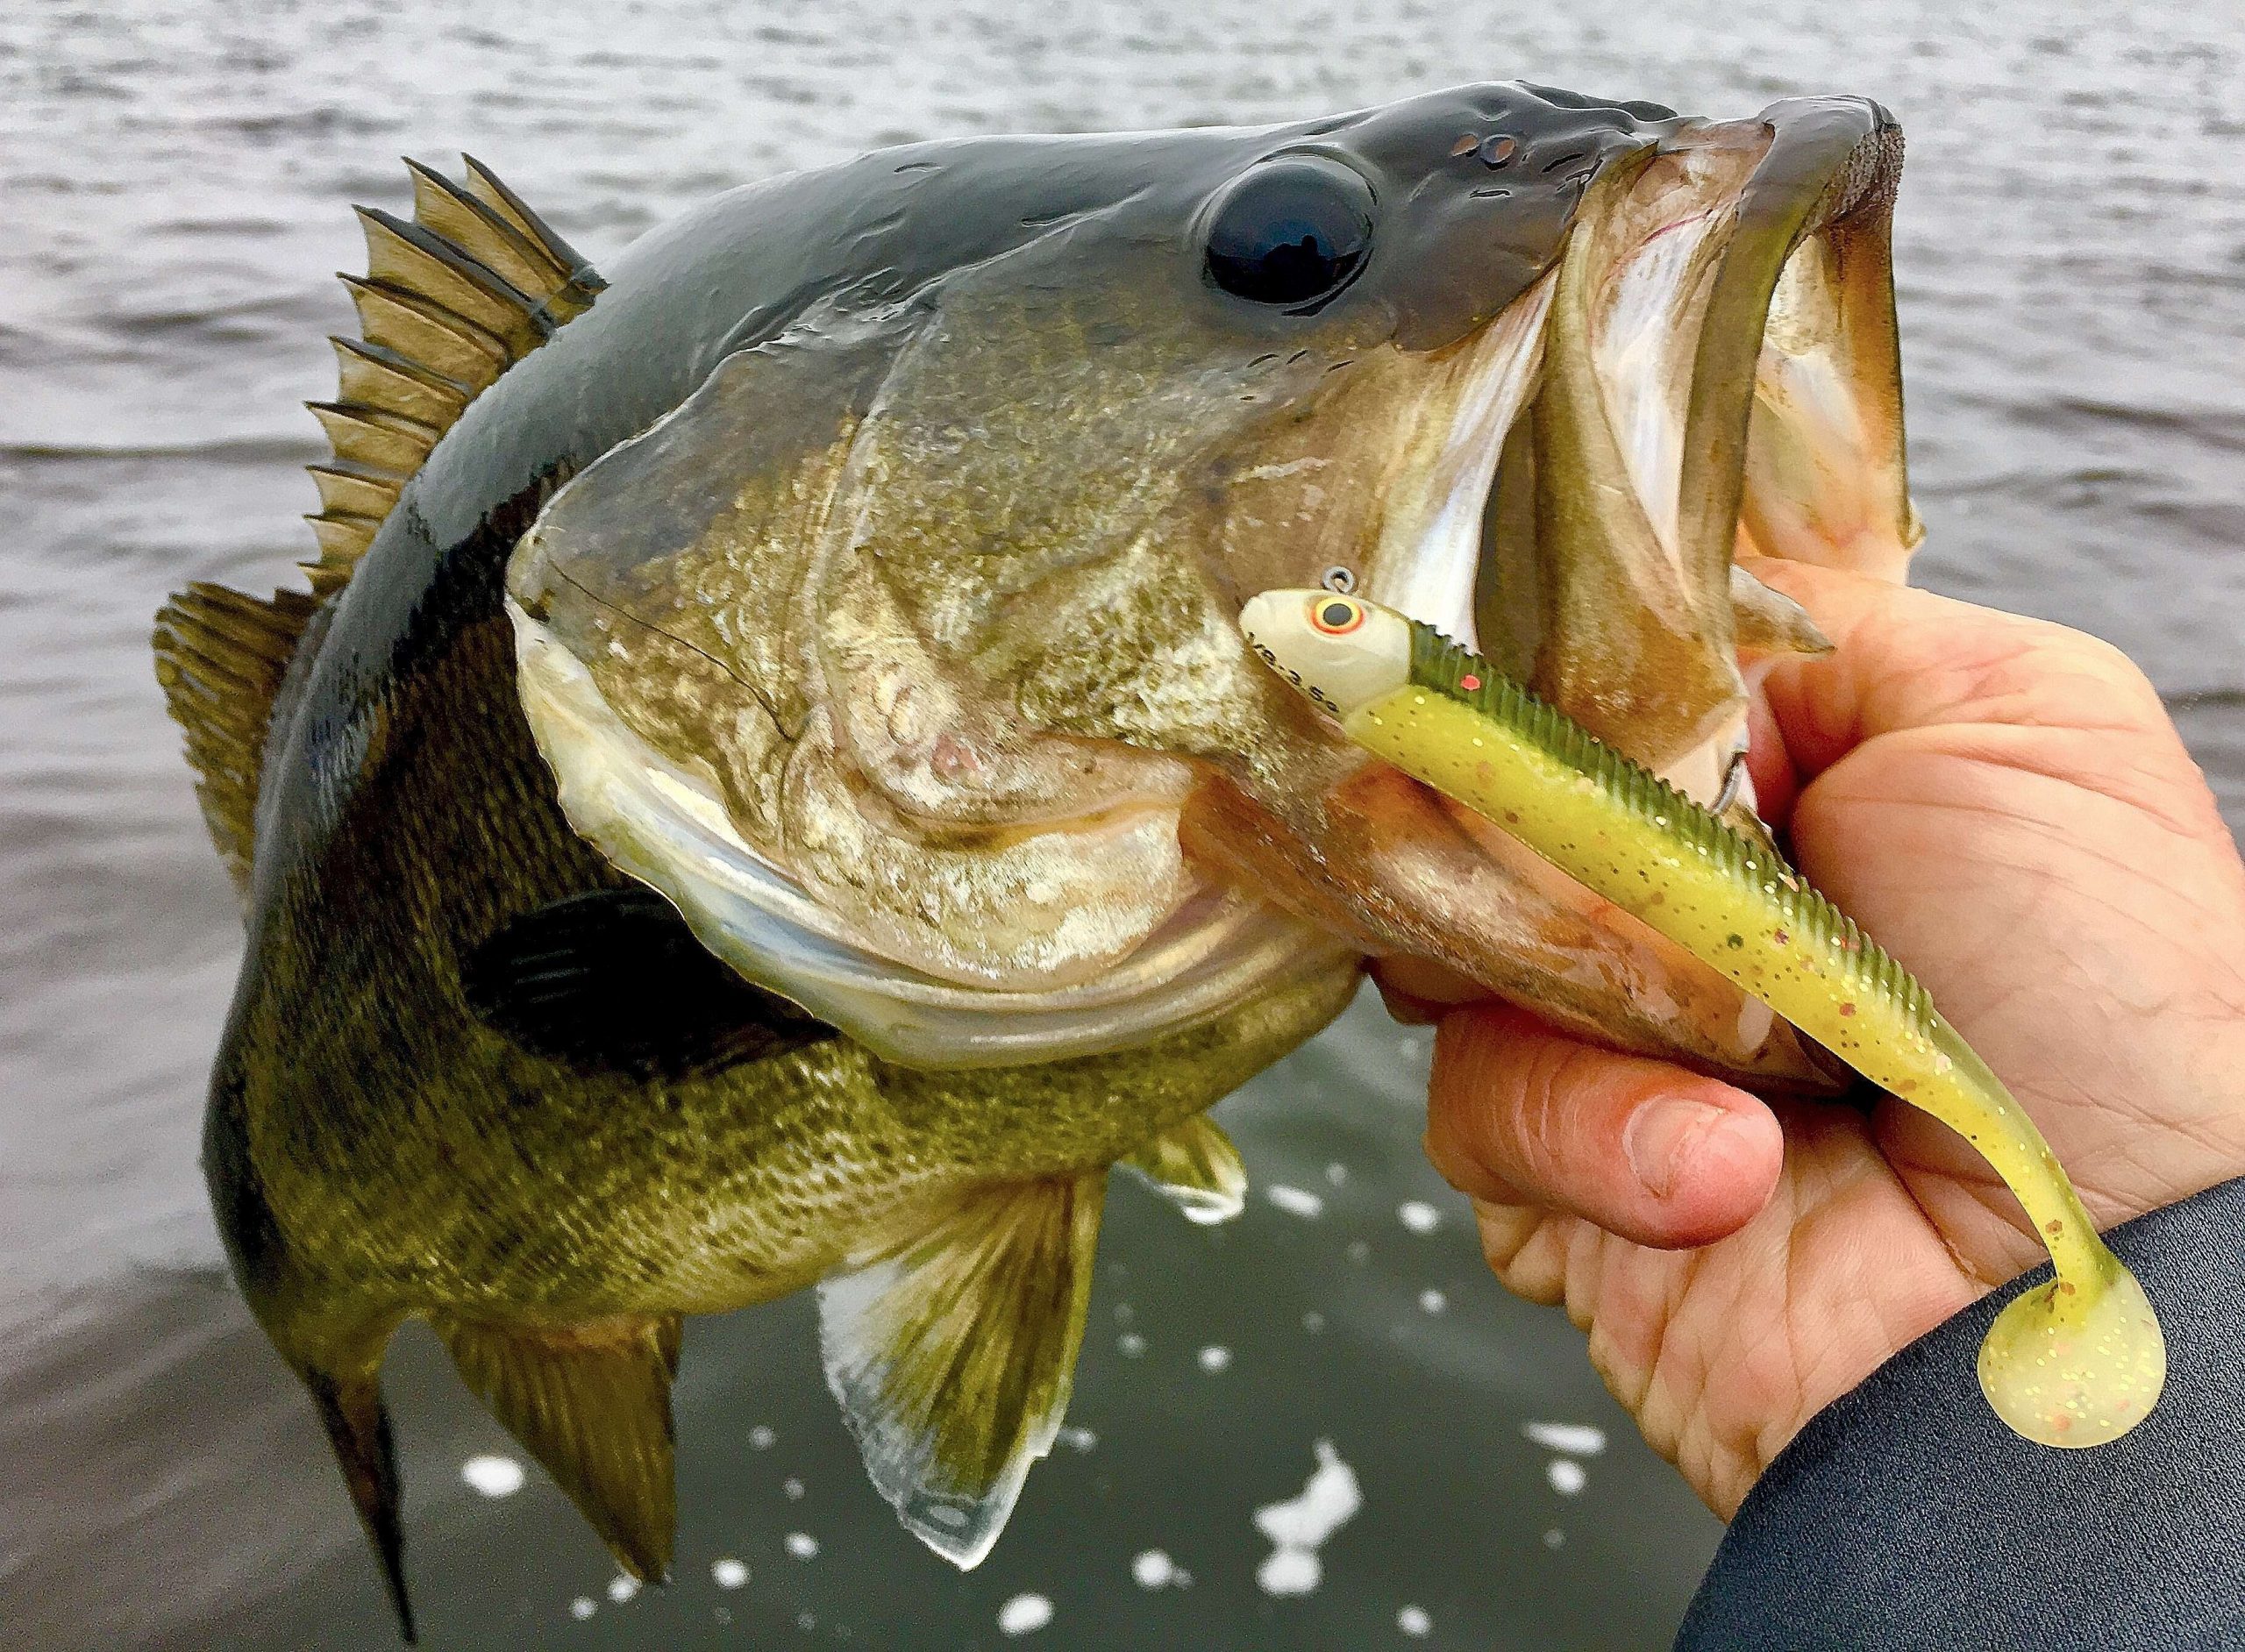 If a big version of something is working, you can always bet the bass fishing world is working to invent a smaller model. Thatâs been true for swimbaits in recent years with models from Storm, Keitech and Yamamoto â just to name a few. 